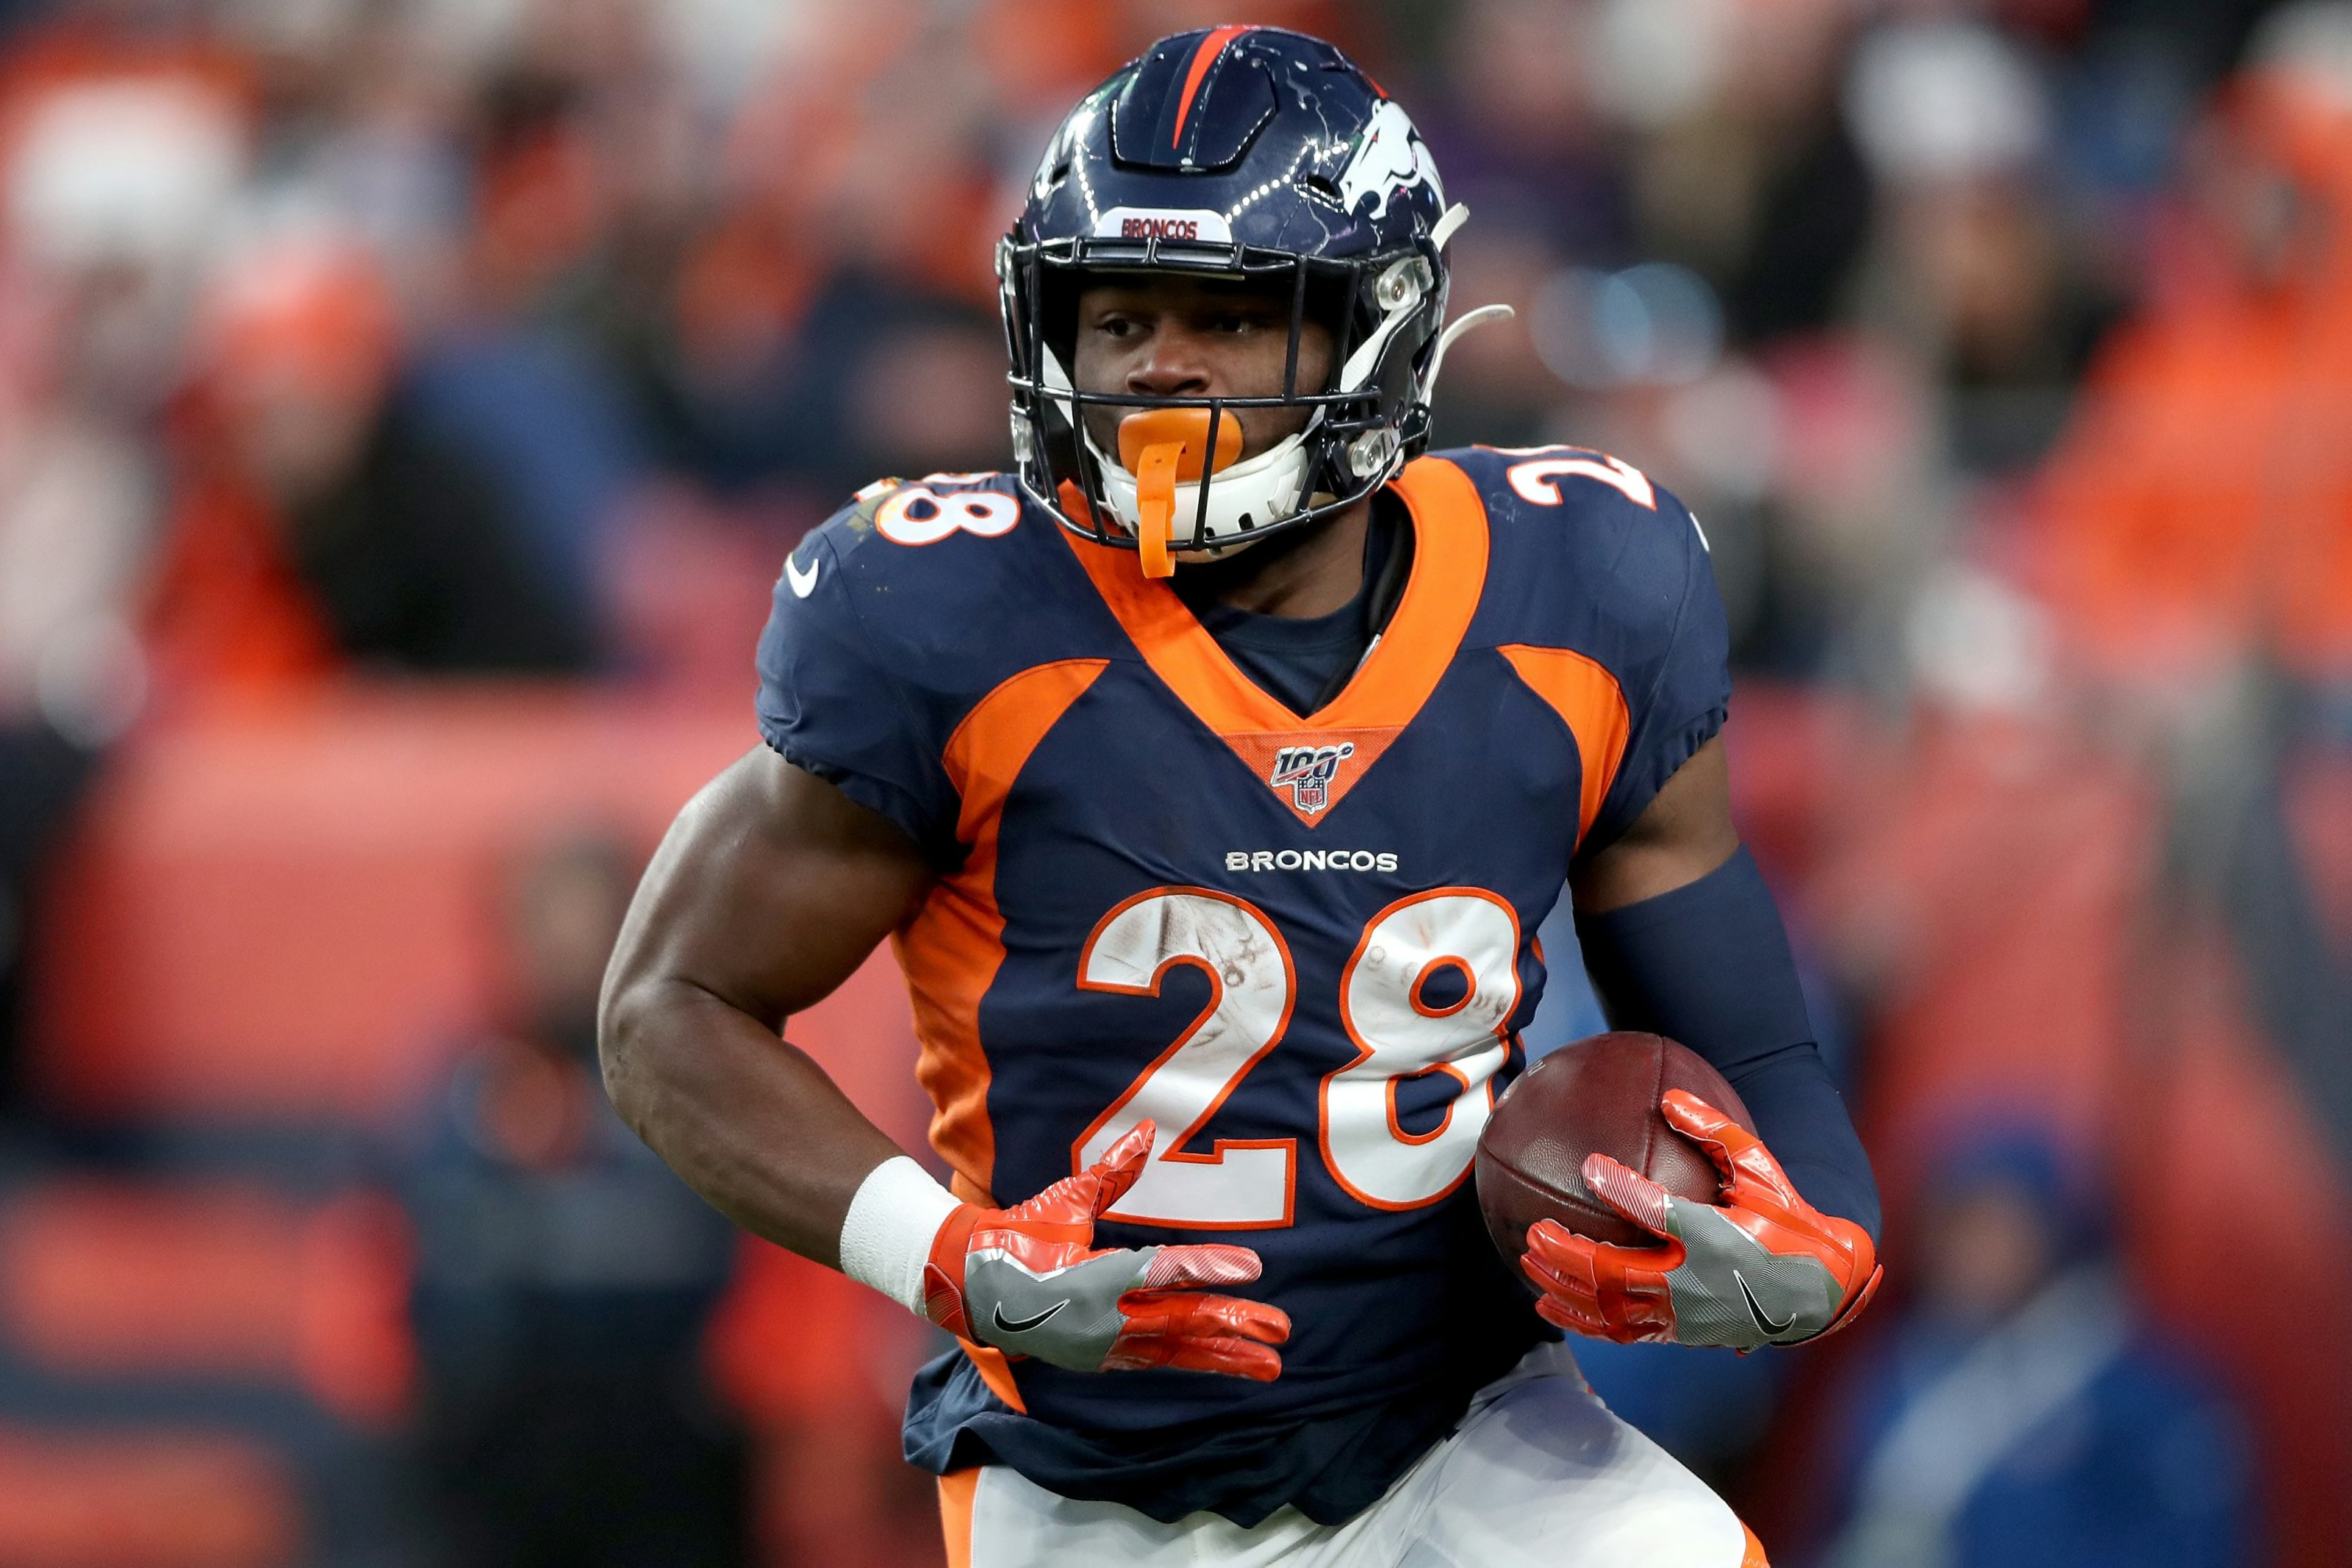 Broncos running backs showed room for improvement in 2019 Page 2